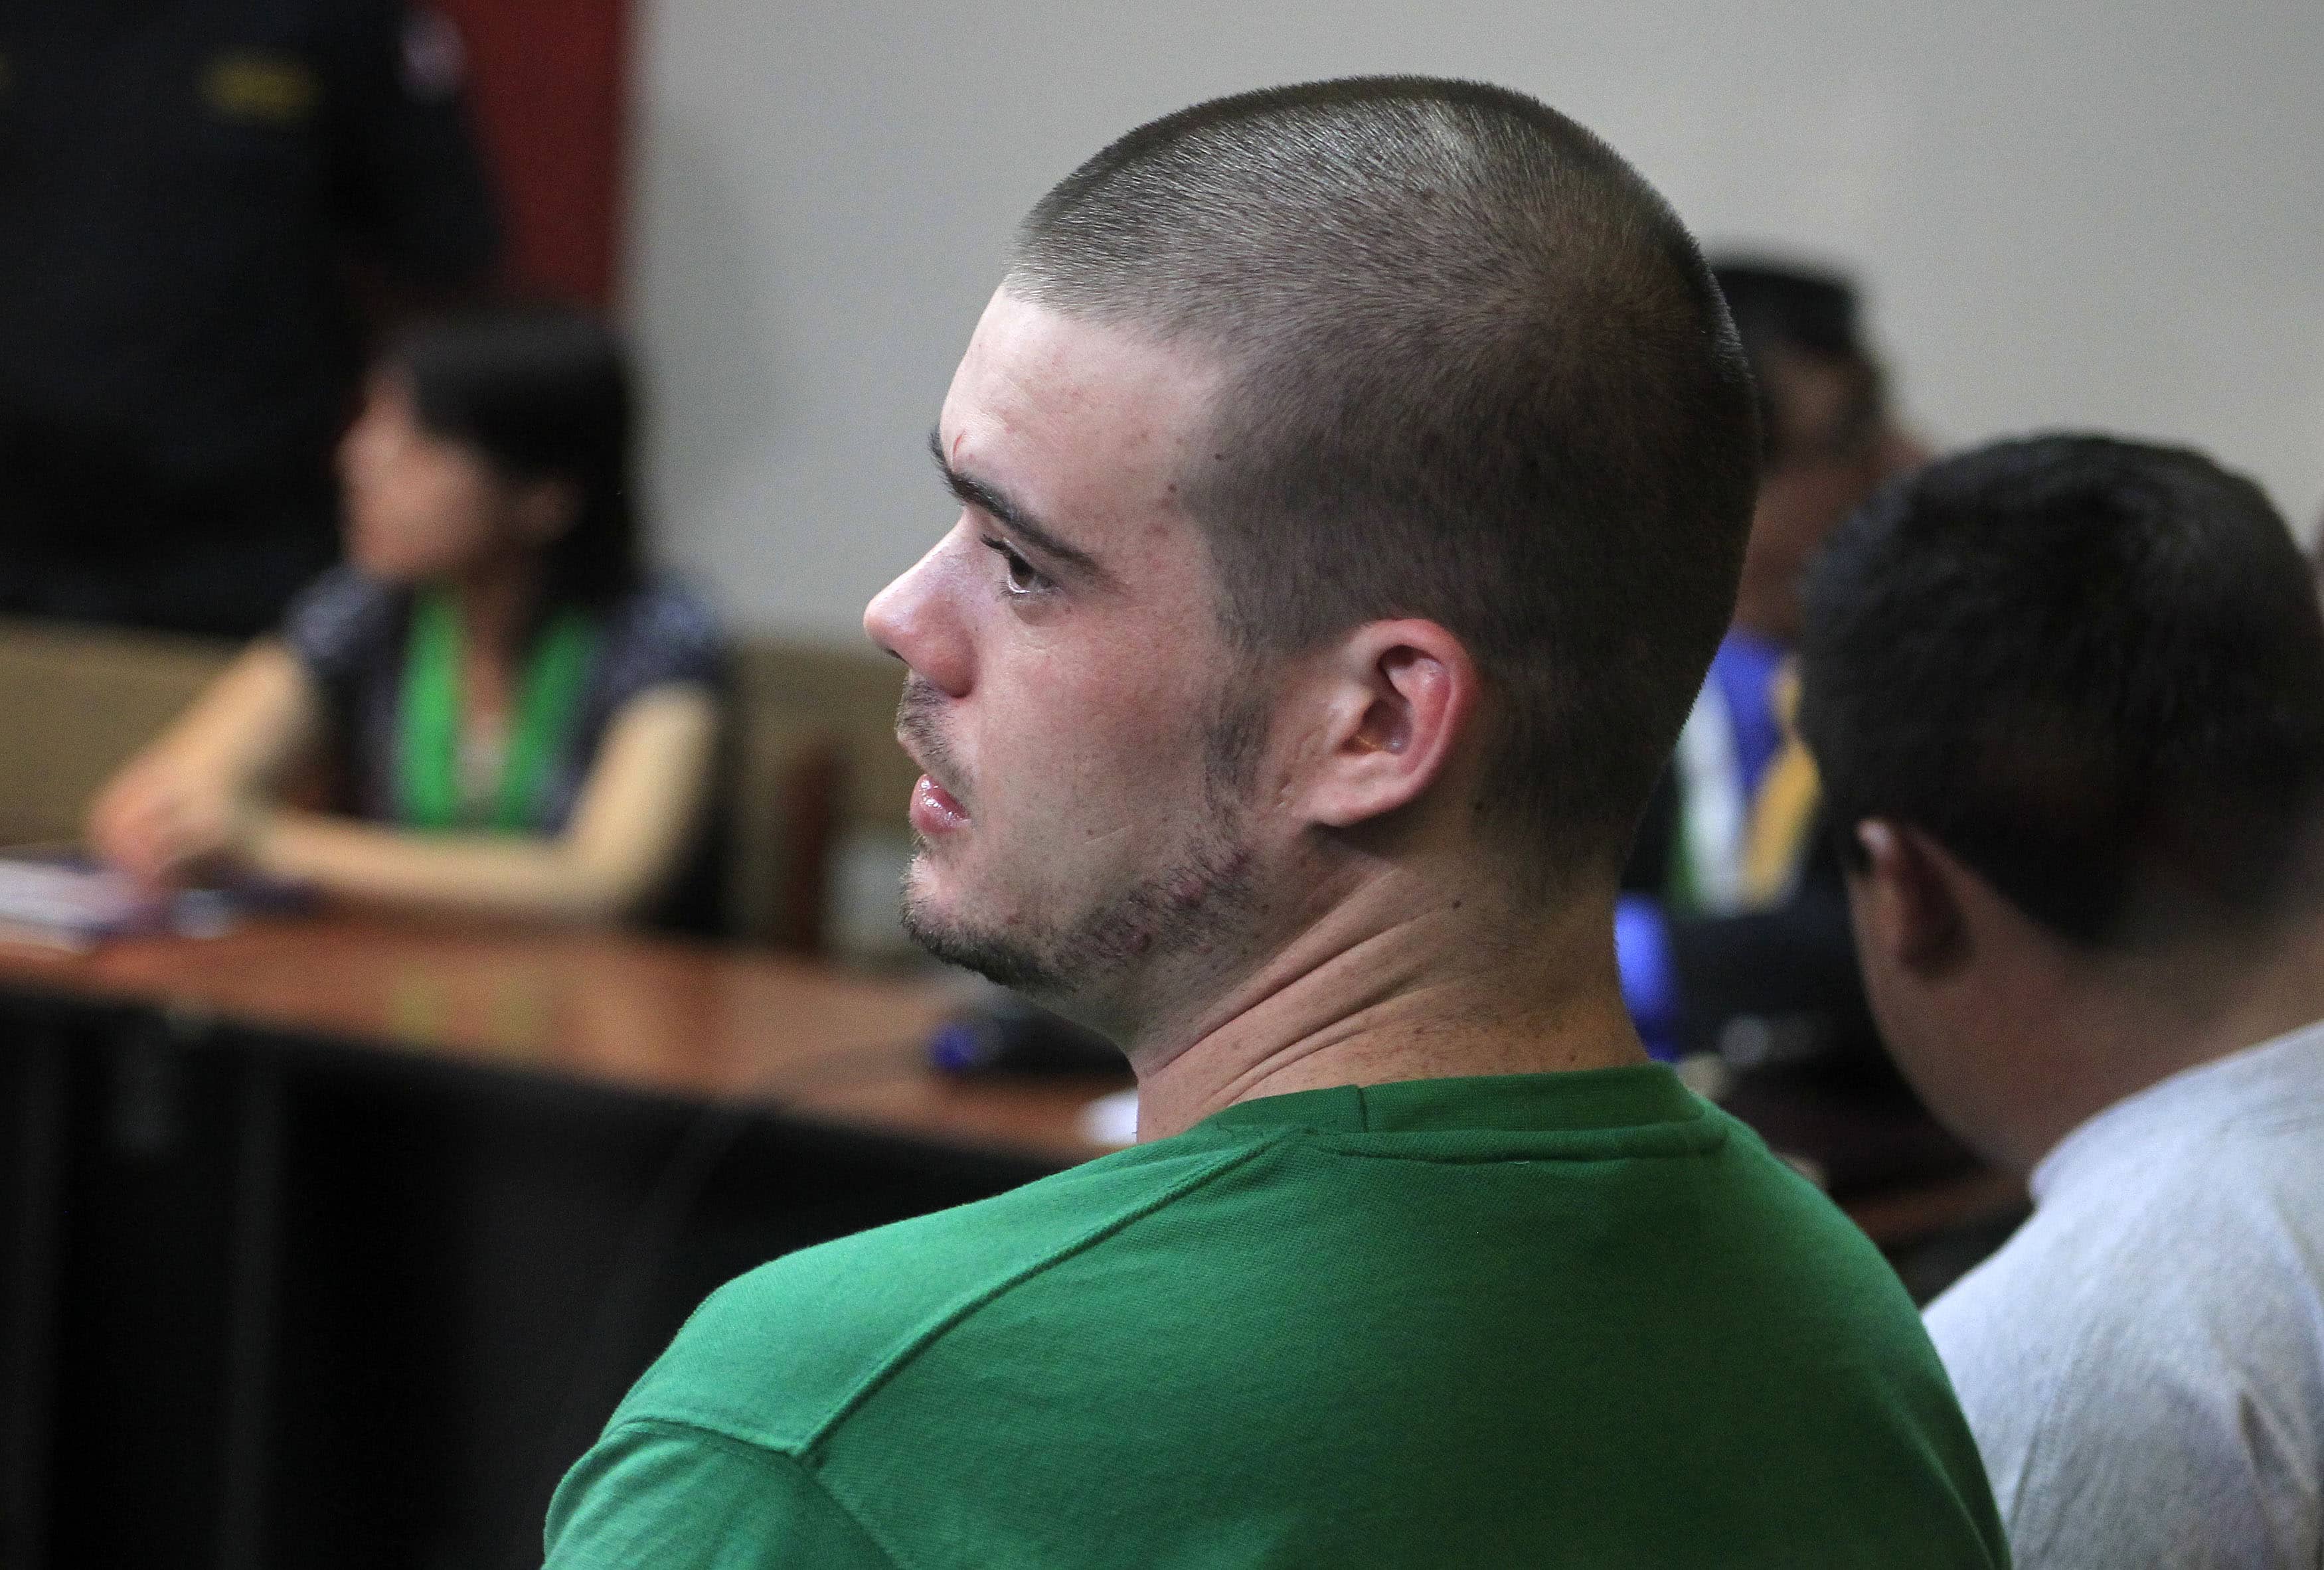 dutch-citizen-joran-van-der-sloot-sits-in-the-courtroom-before-the-reading-of-his-verdict-in-lima